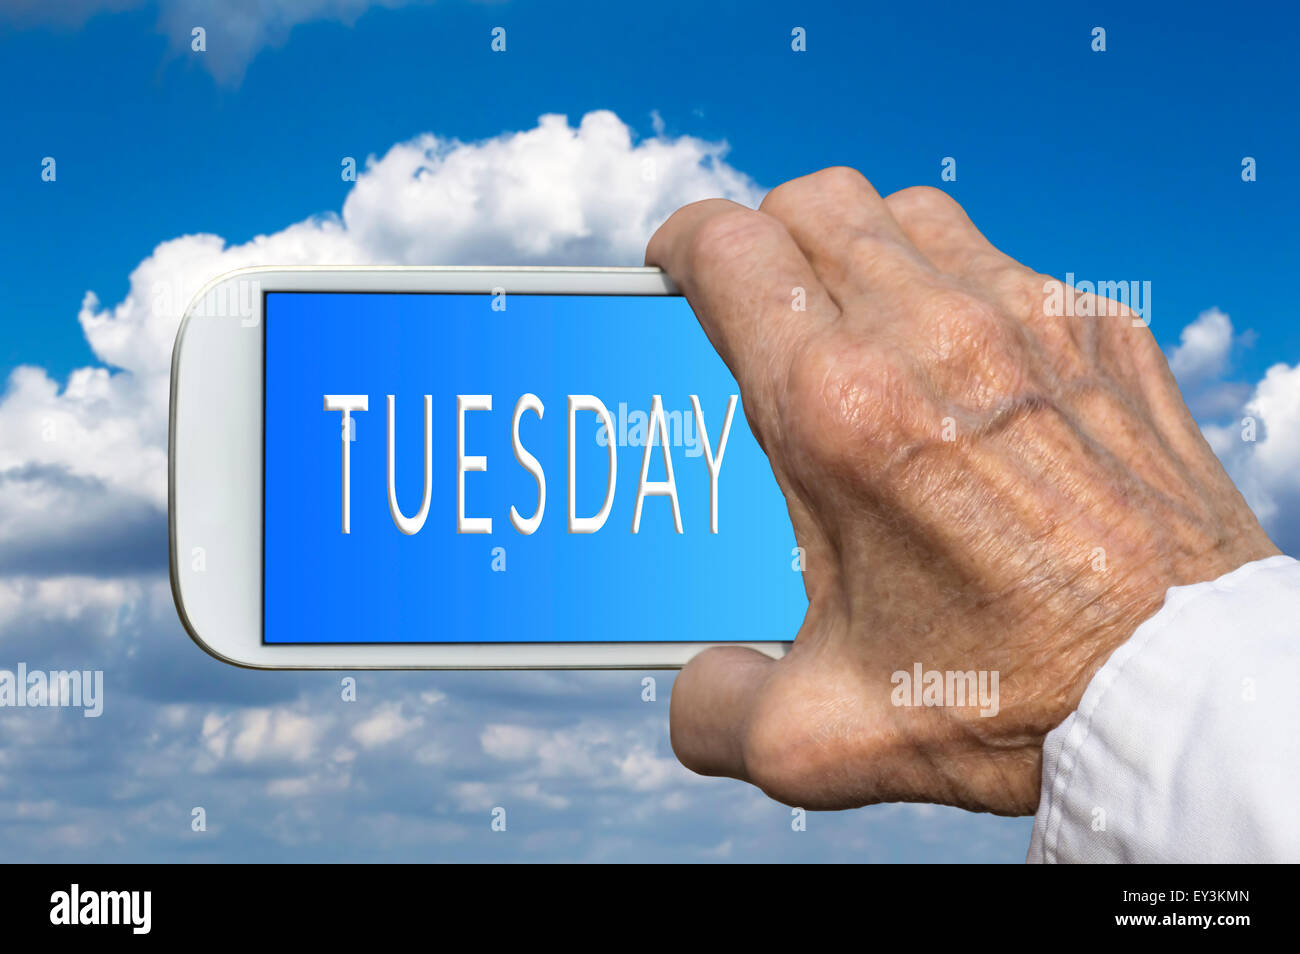 Smart phone in old hand with days of the week - Tuesday on screen. Selective focus. Stock Photo